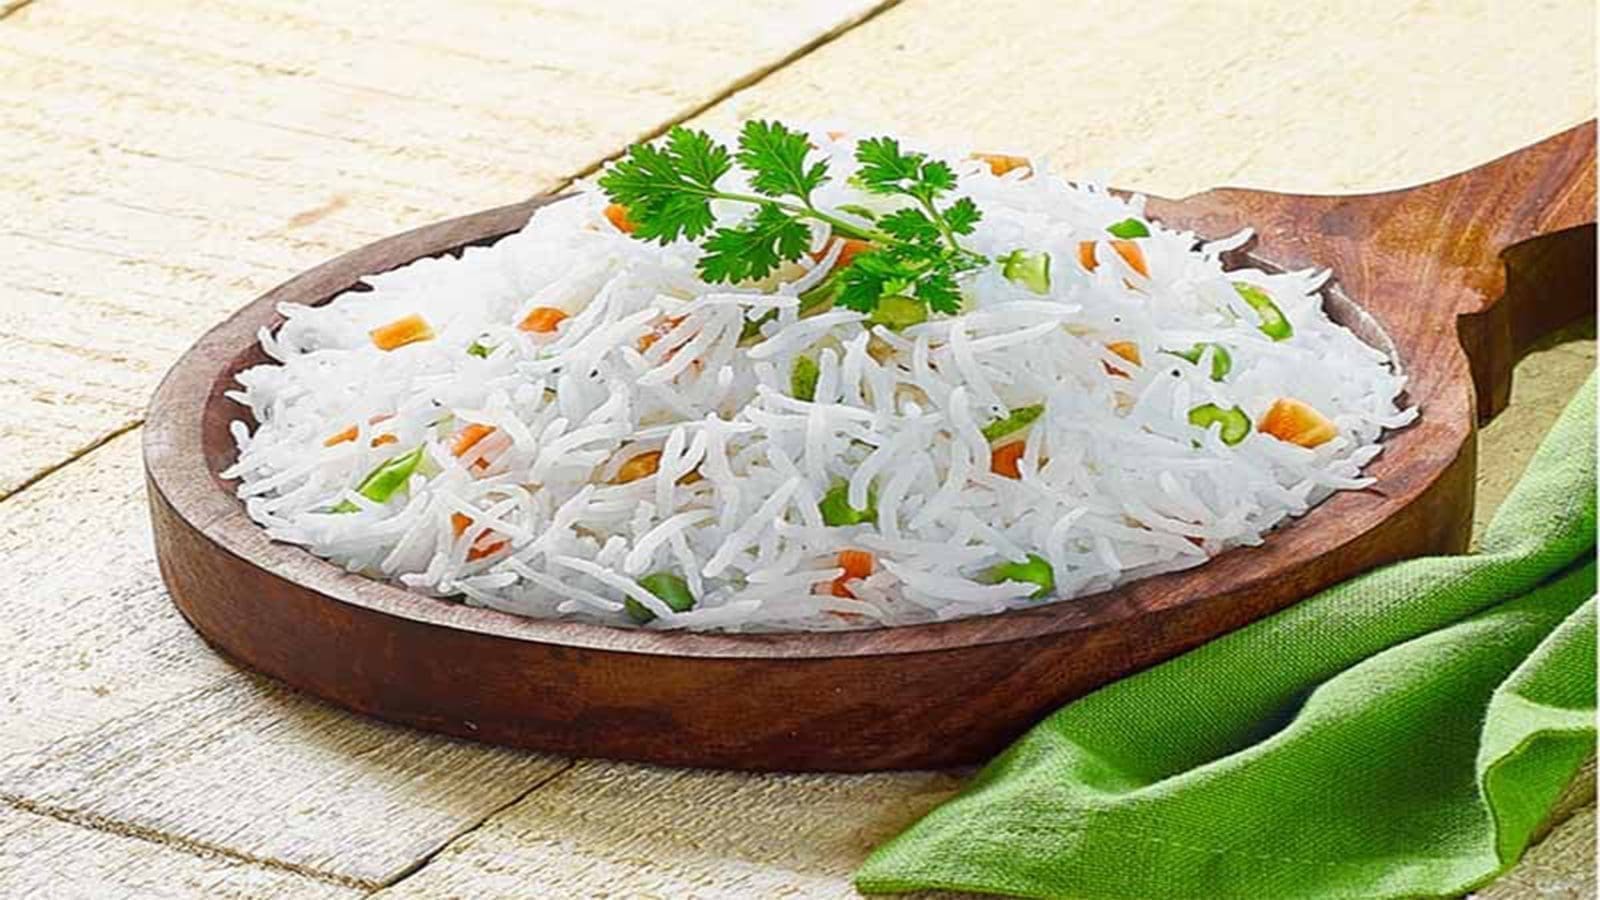 FSSAI endeavors to close Basmati rice adulteration loop by specifying standards